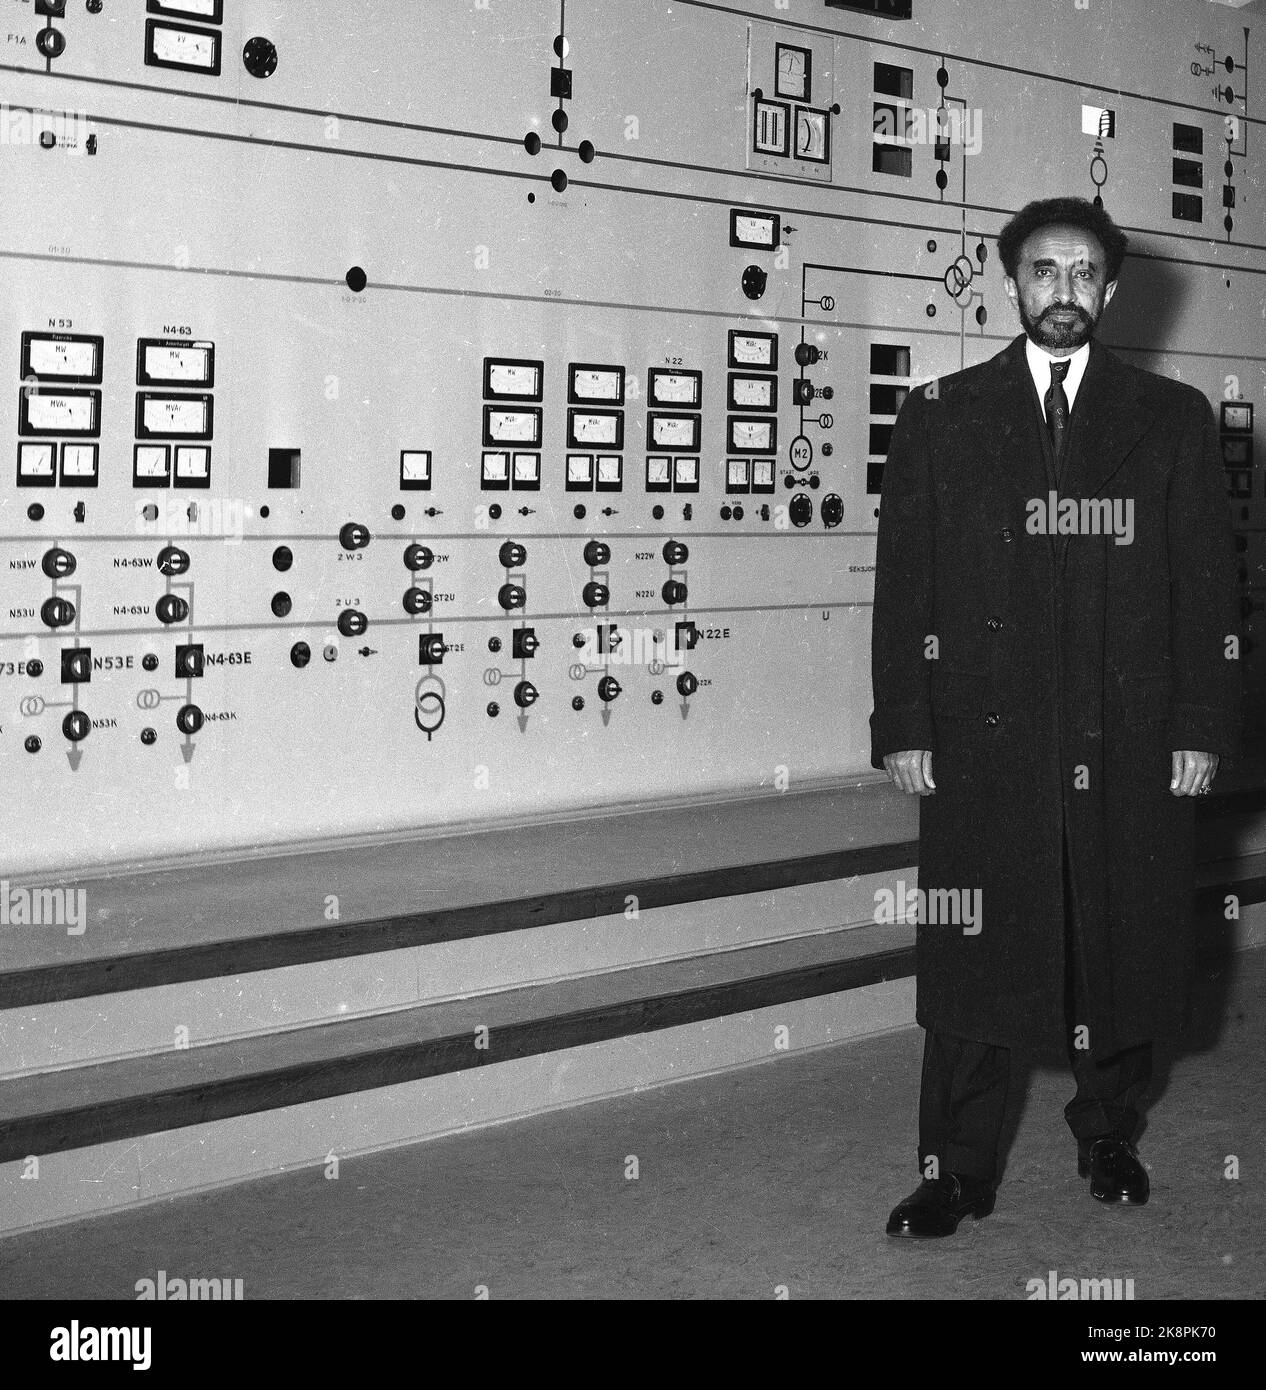 Oslo 19541119 Ethiopia's Emperor Haile Selassie on official visit to Norway. Here at Sogn transformat station. Photo; Ntb Physical LOC. NEG. 16062 in Stock Photo